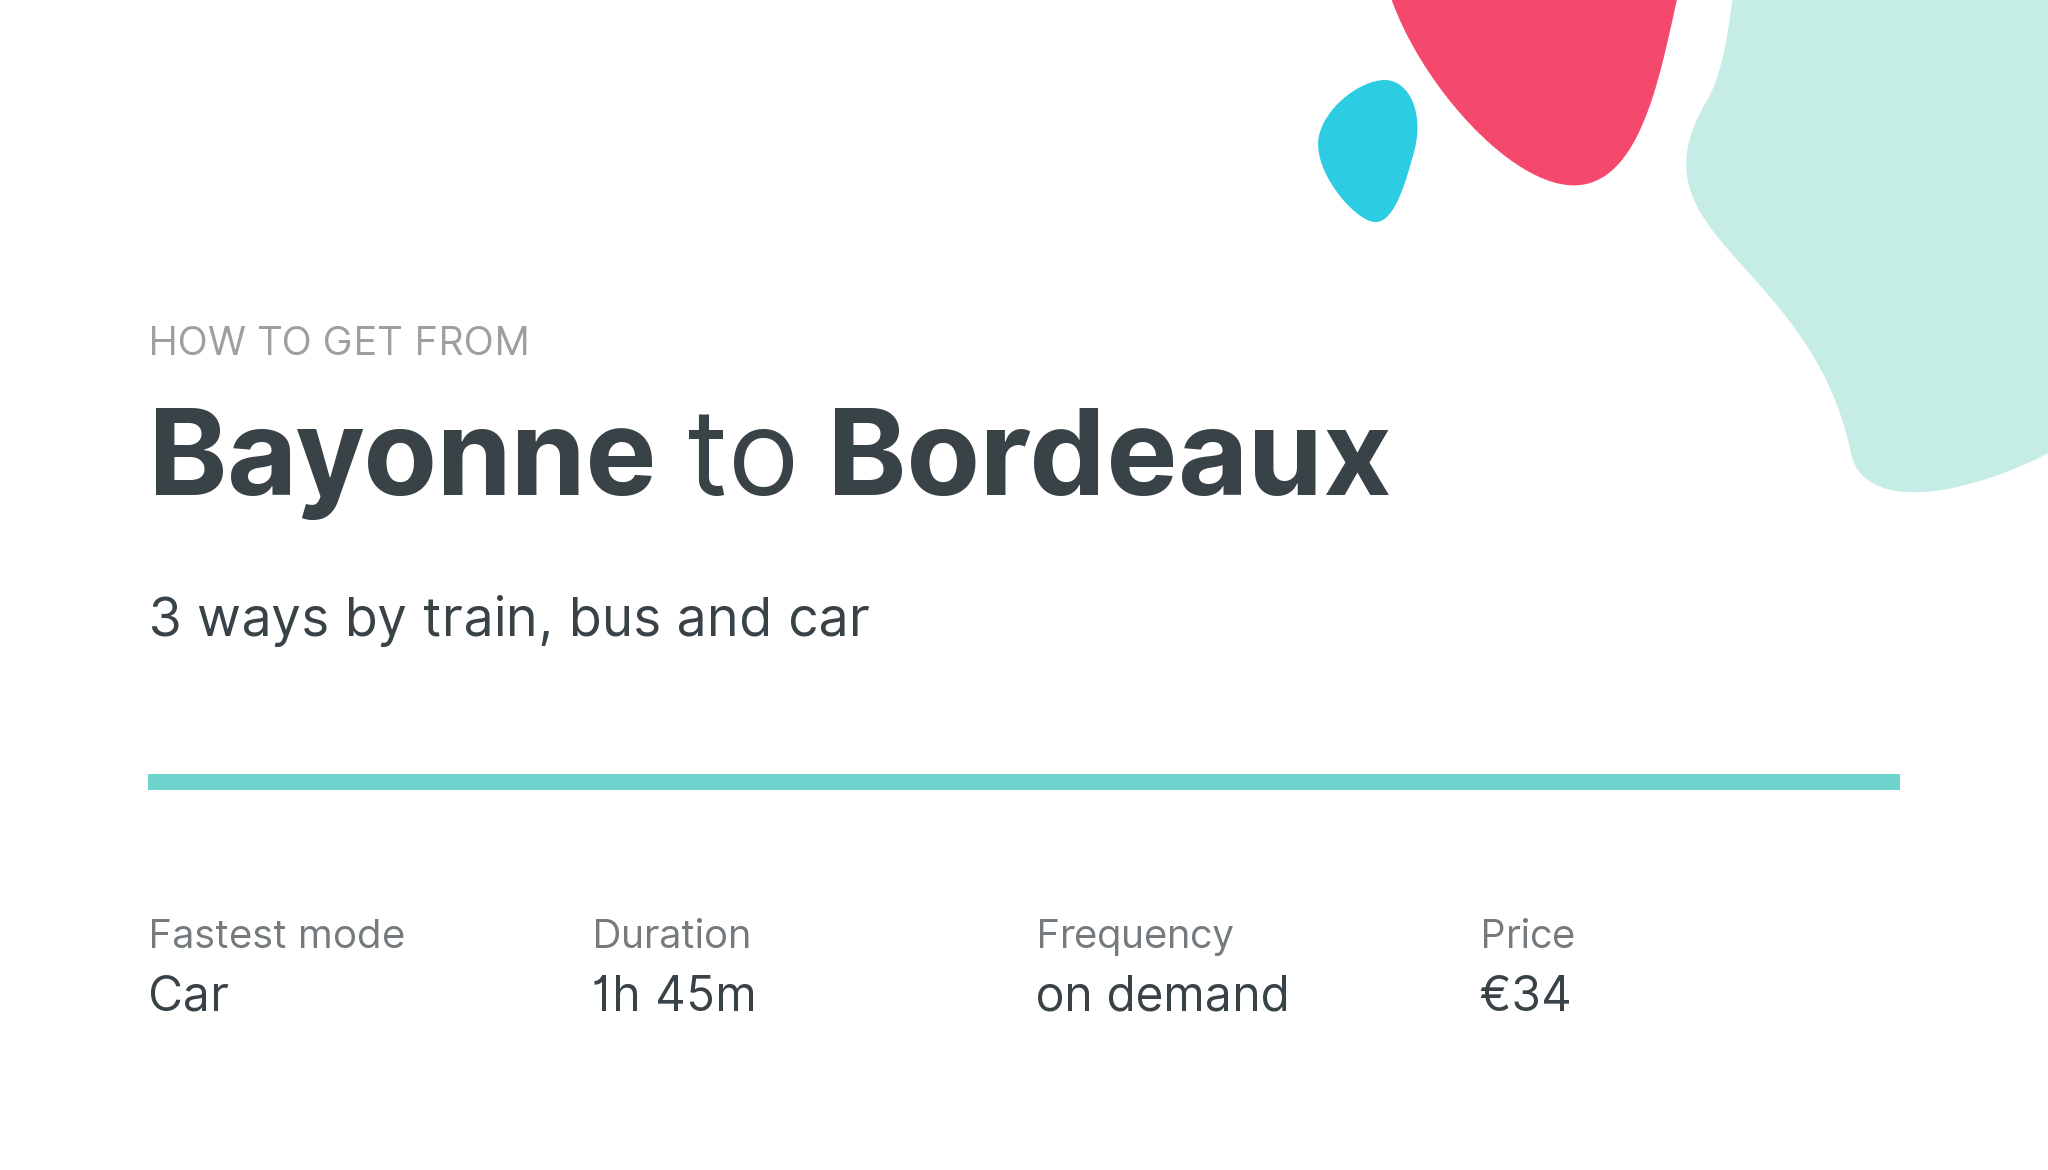 How do I get from Bayonne to Bordeaux